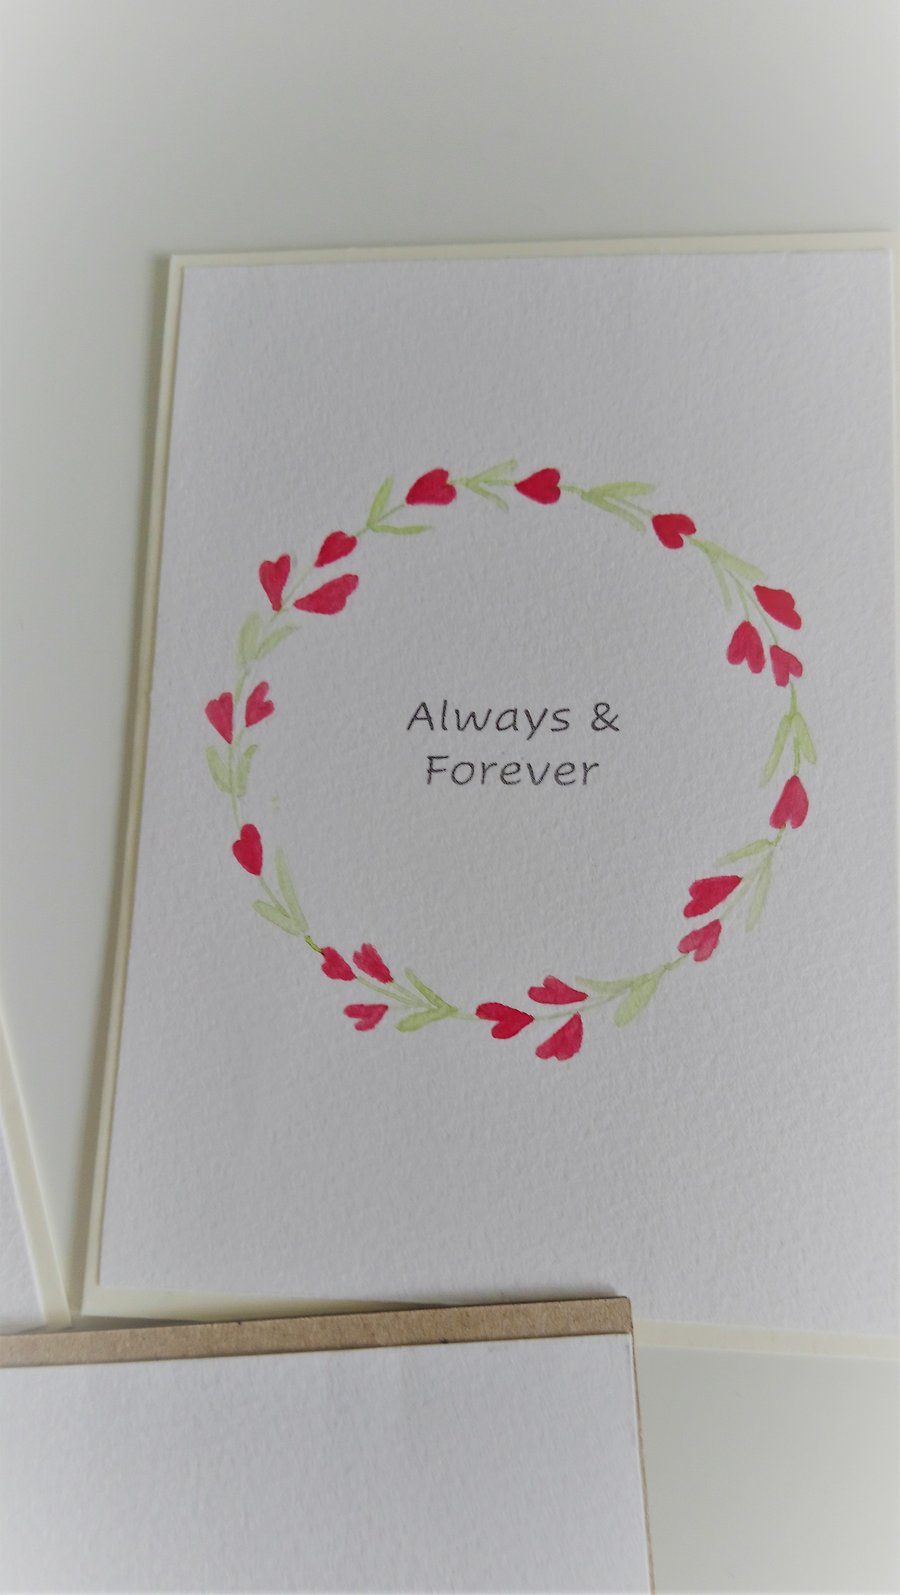 Original Hand Painted "Always & Forever" Card with Red Heart Flower Wreath